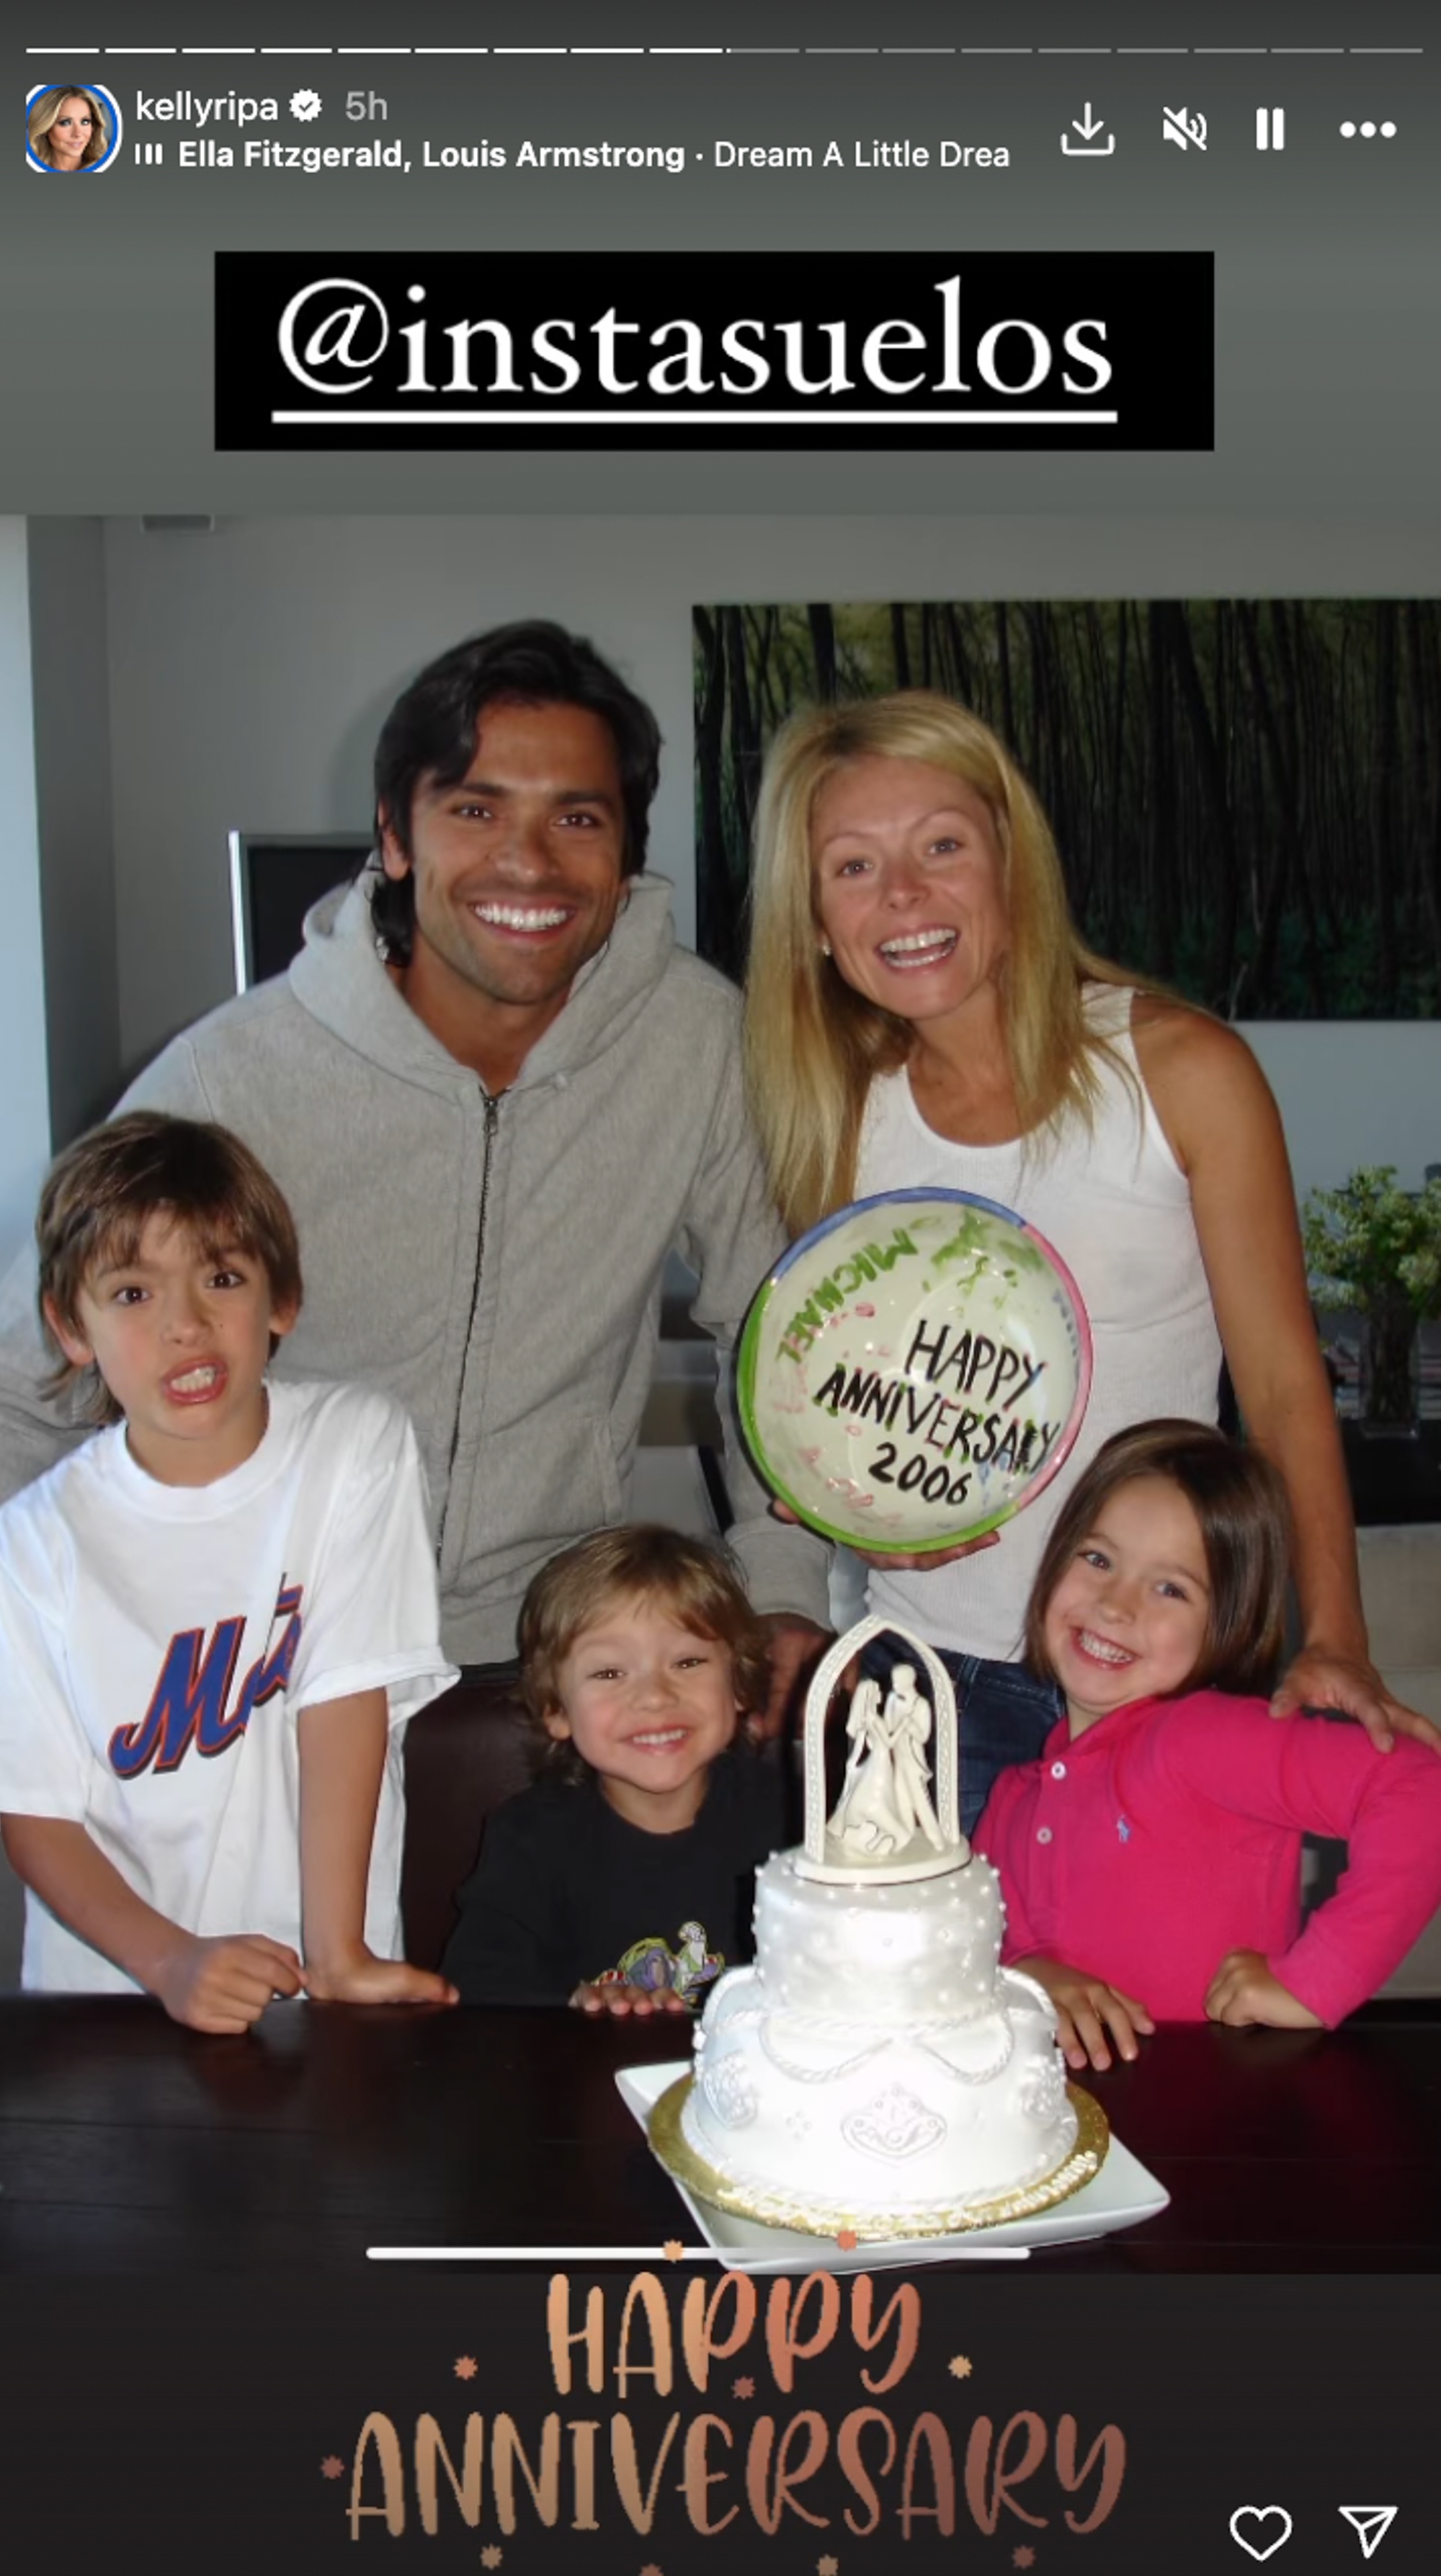 A throwback photo of Kelly Ripa and Mark Consuelos with their three kids